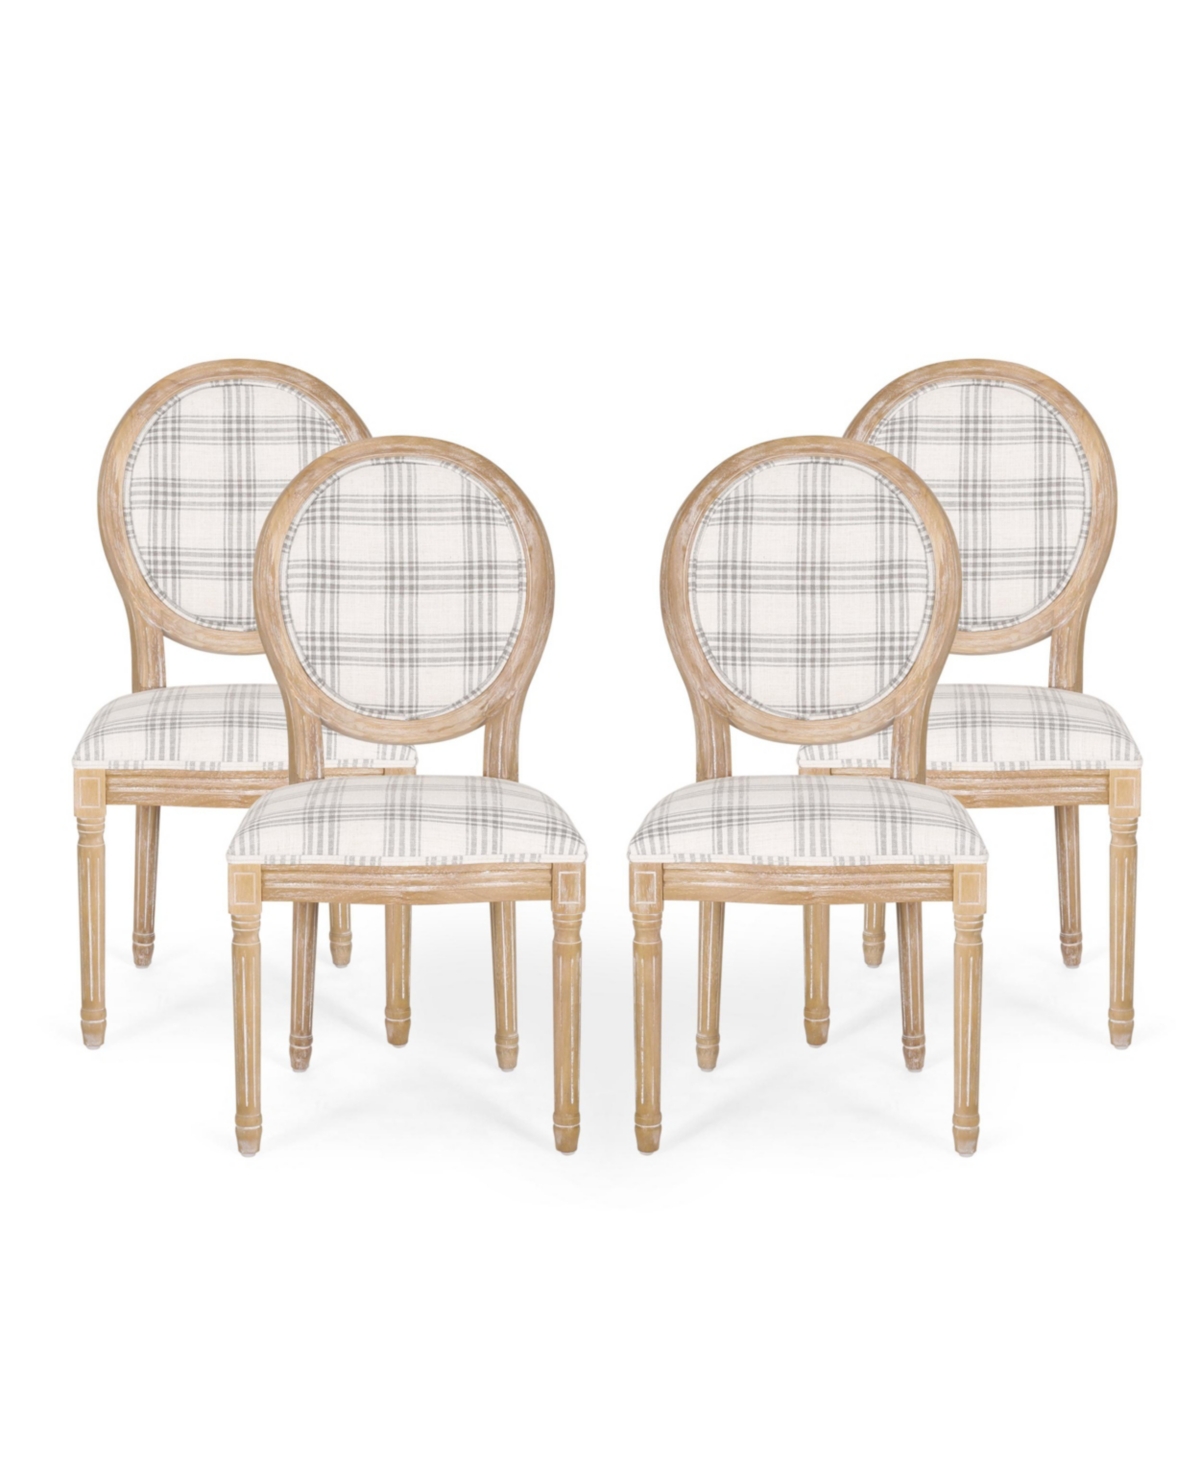 Noble House Phinnaeus French Country Dining Chairs Set, 4 Piece In Dark Blue Stripes And Light Beige